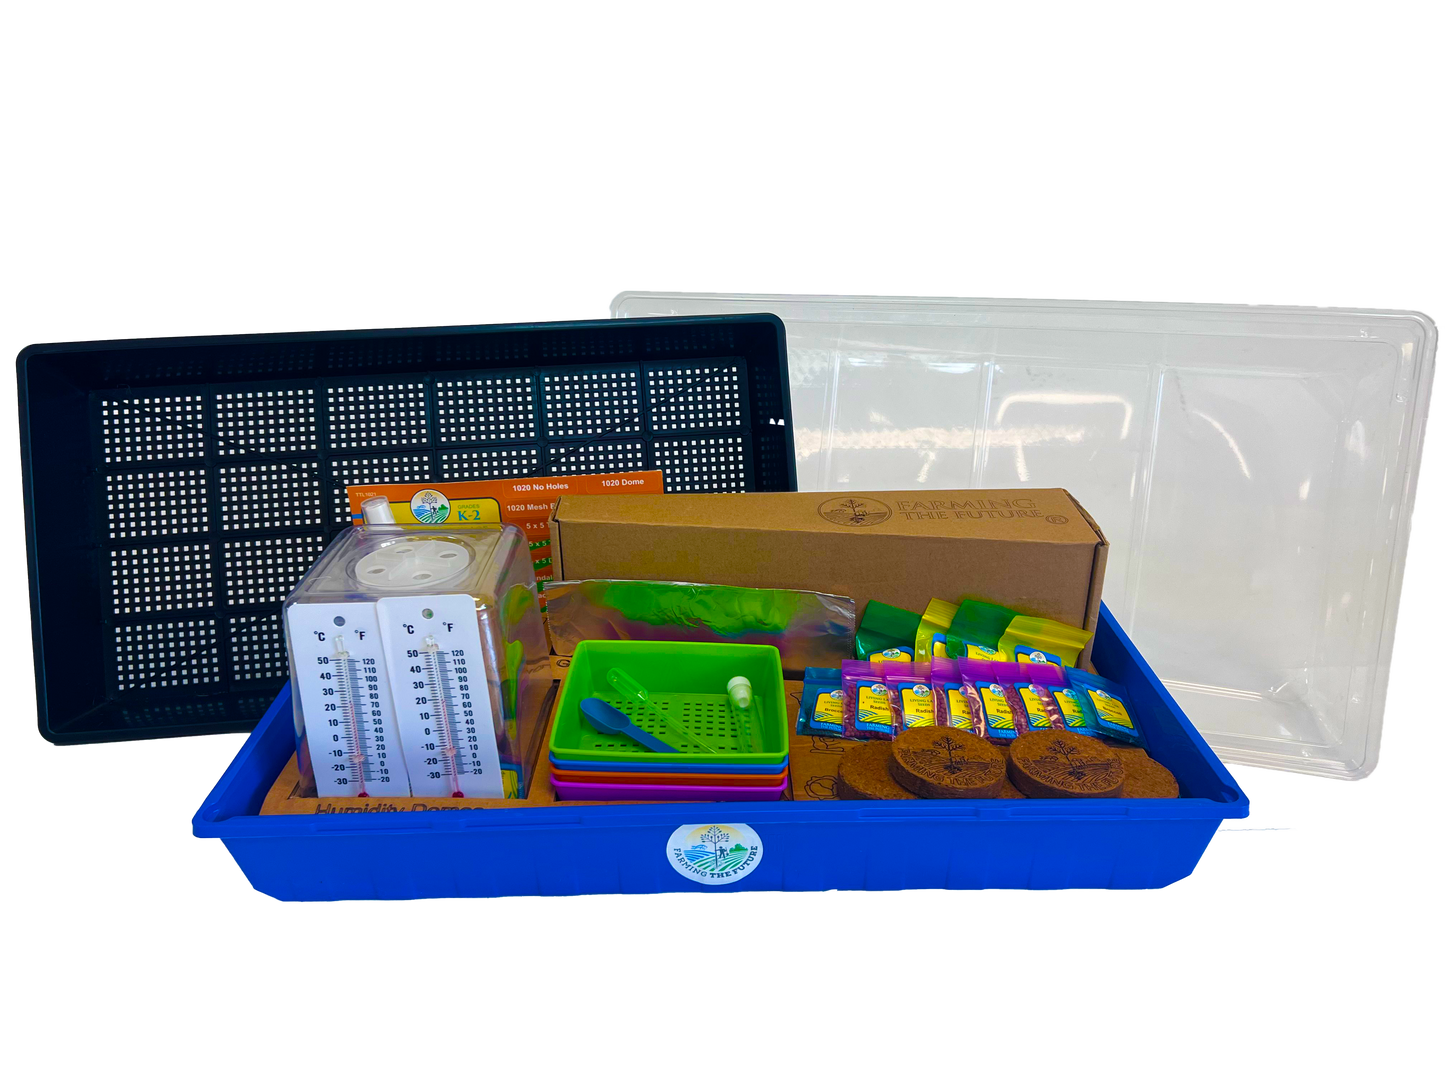 K-2 Table Top Living Lab w/ Curriculum Subscription